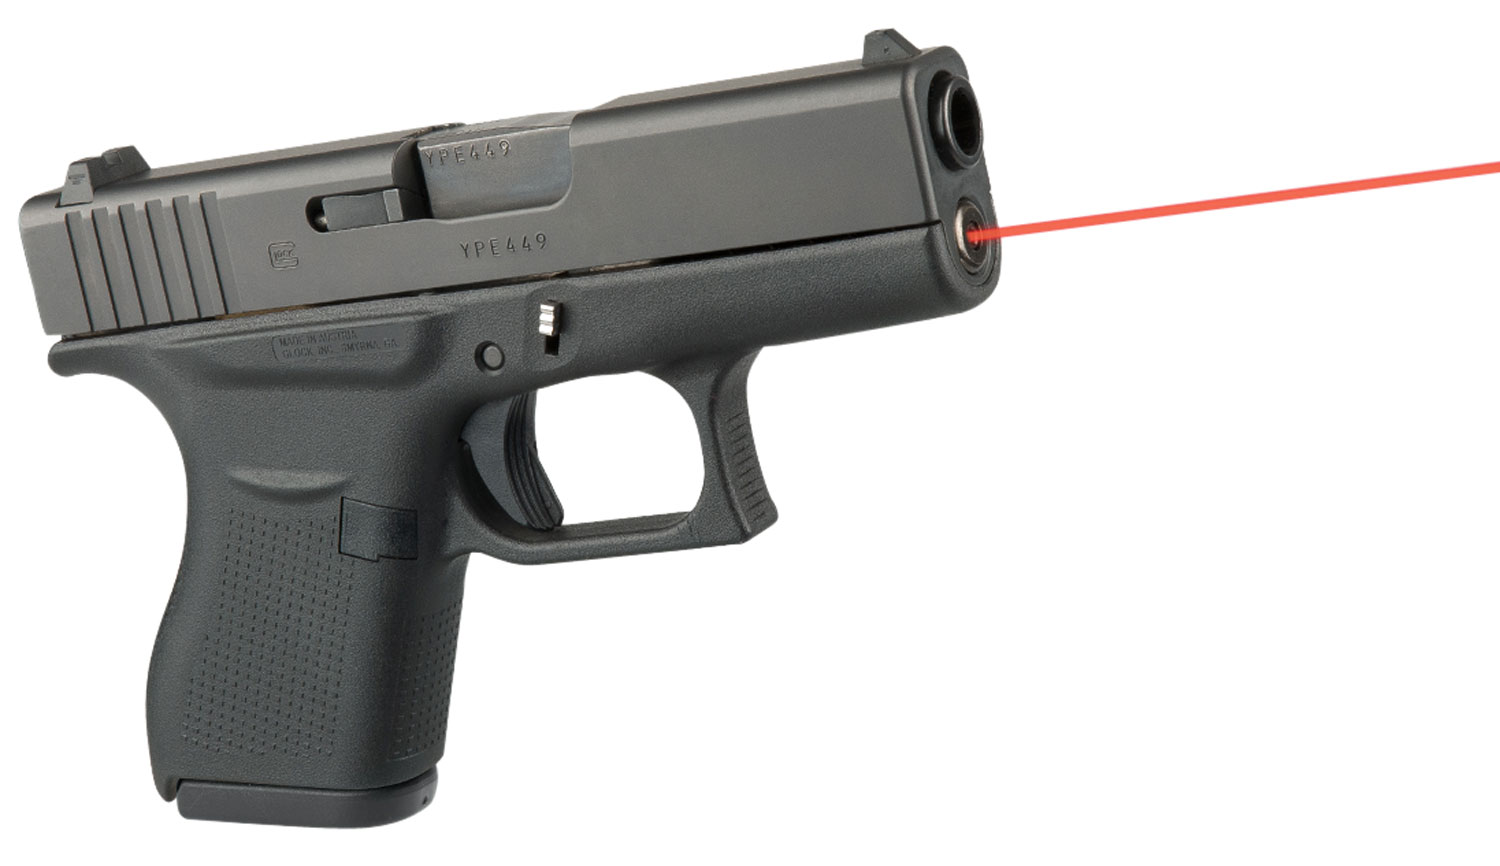 LaserMax LMSG43 Guide Rod Laser 5mW Red Laser with 650nM Wavelength & Made of Stainless Steel for Glock 43, 48, 43X